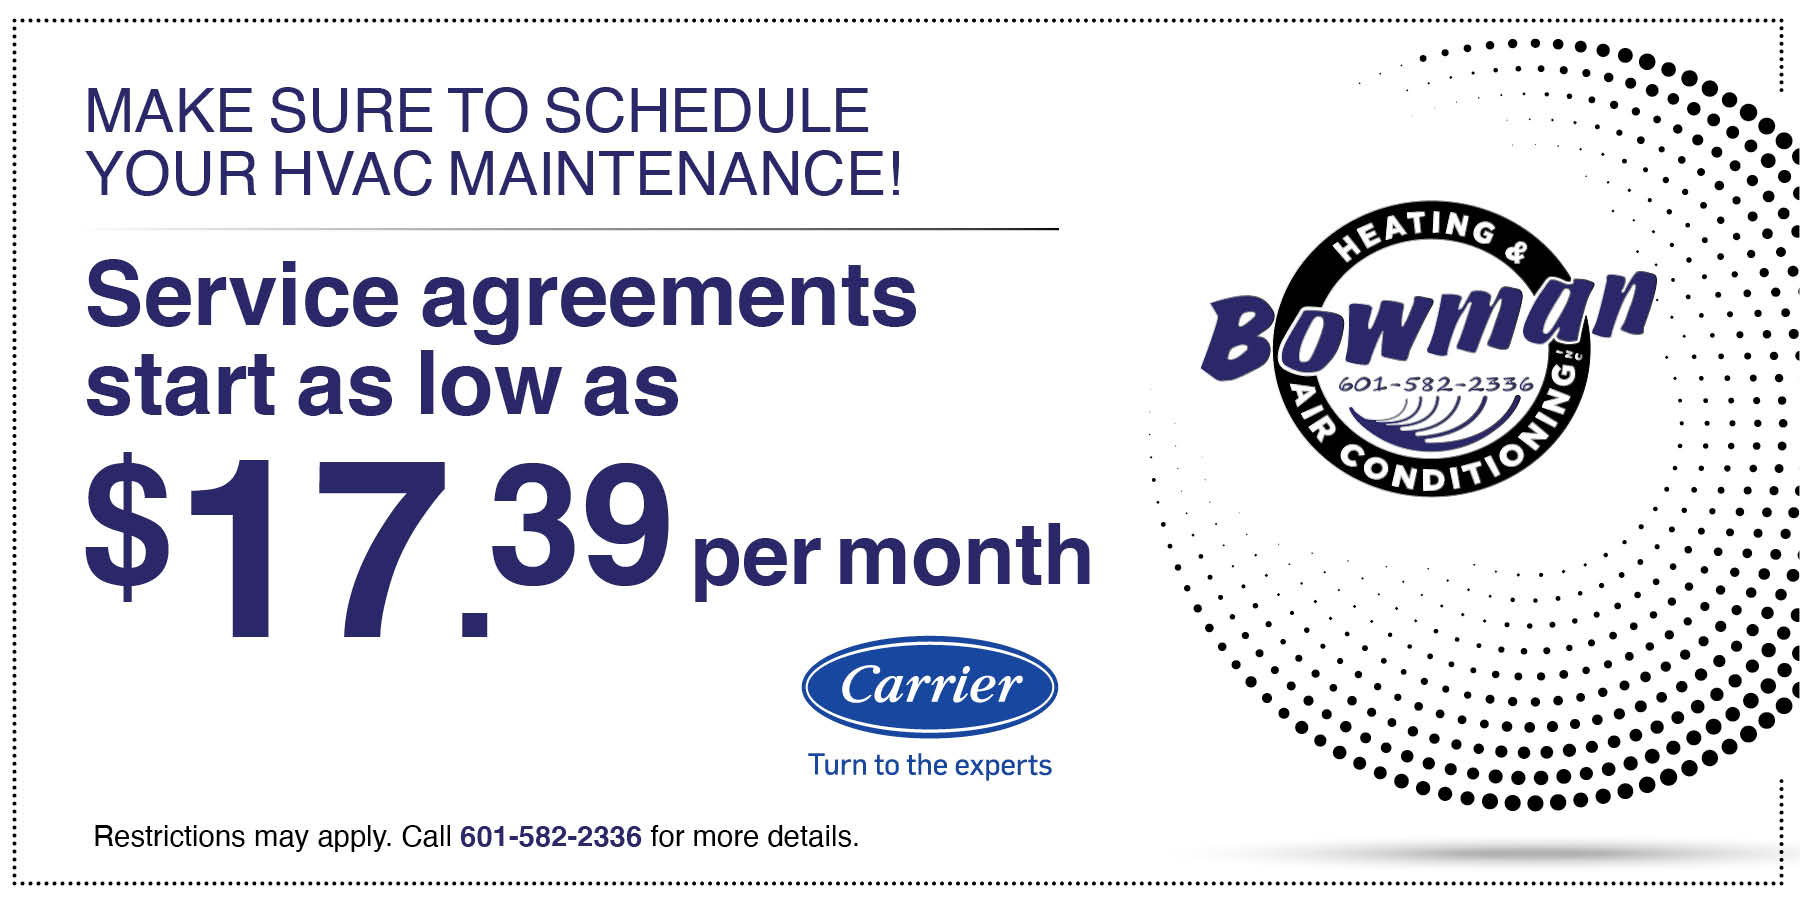 Special Promoting Maintenance Agreements for as low as $17.39 a month. Call 601-582-2336